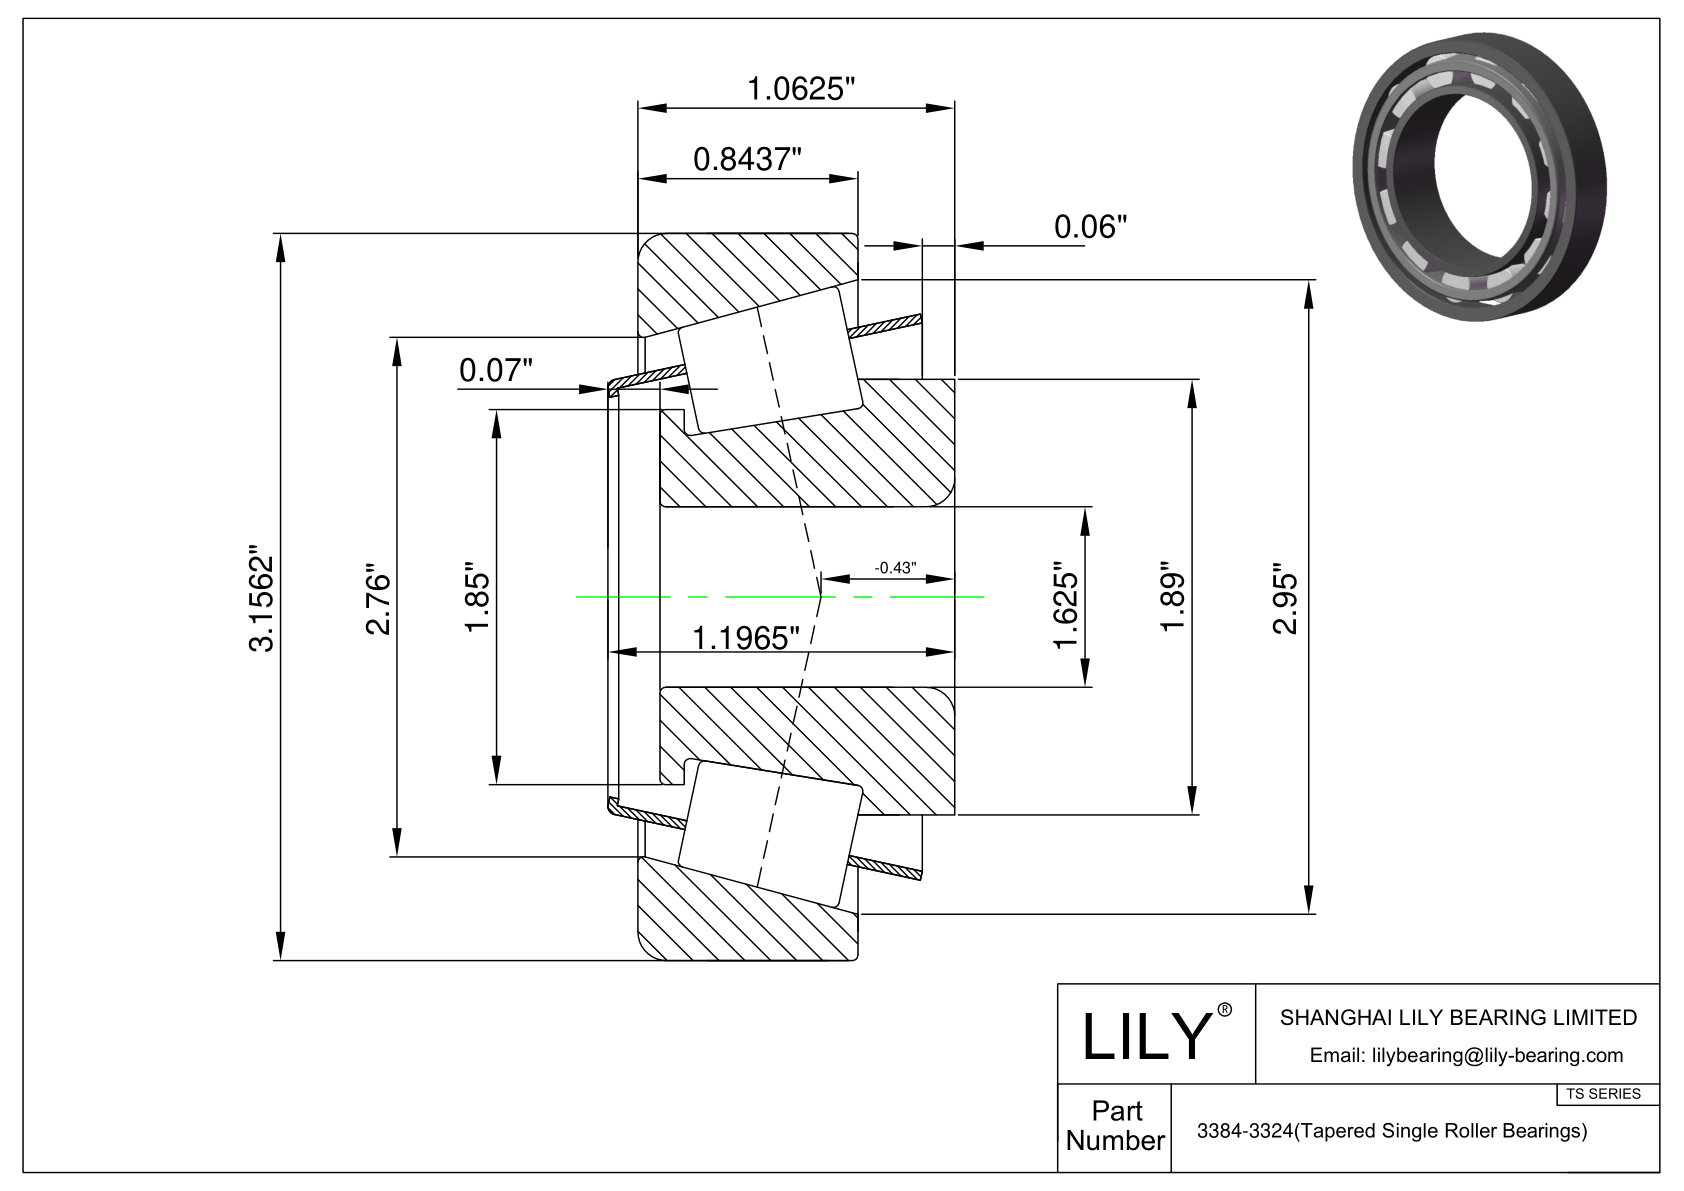 3384-3324 TS (Tapered Single Roller Bearings) (Imperial) cad drawing